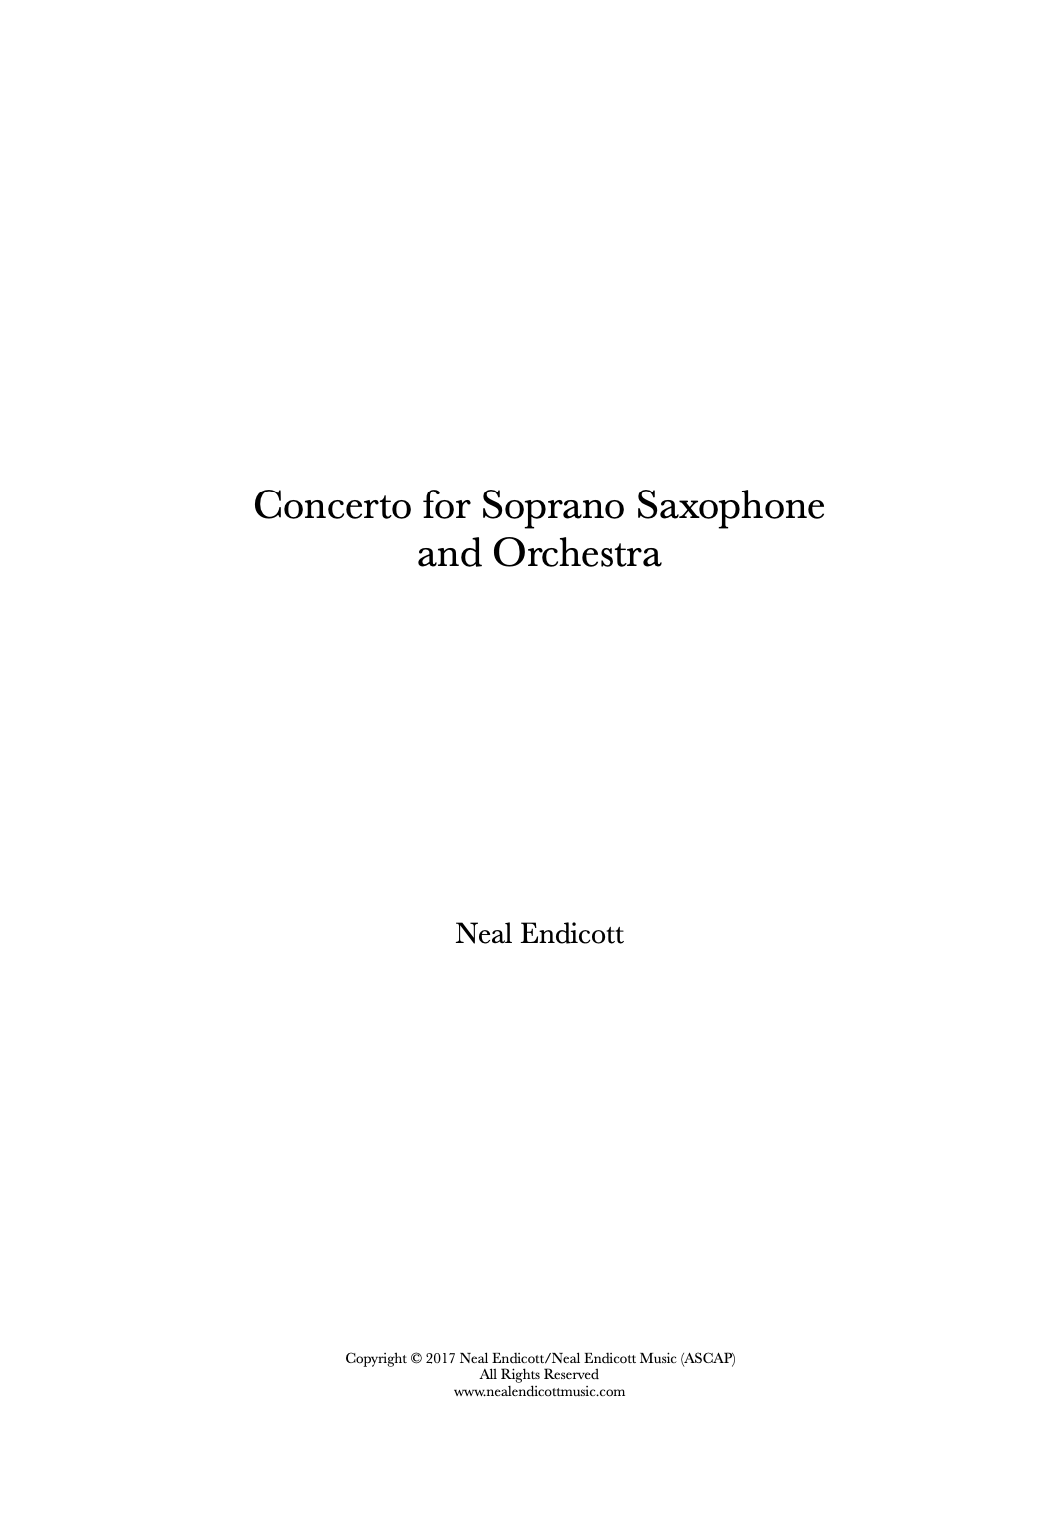 Concerto For Soprano Saxophone And Orchestra by Neal Endicott